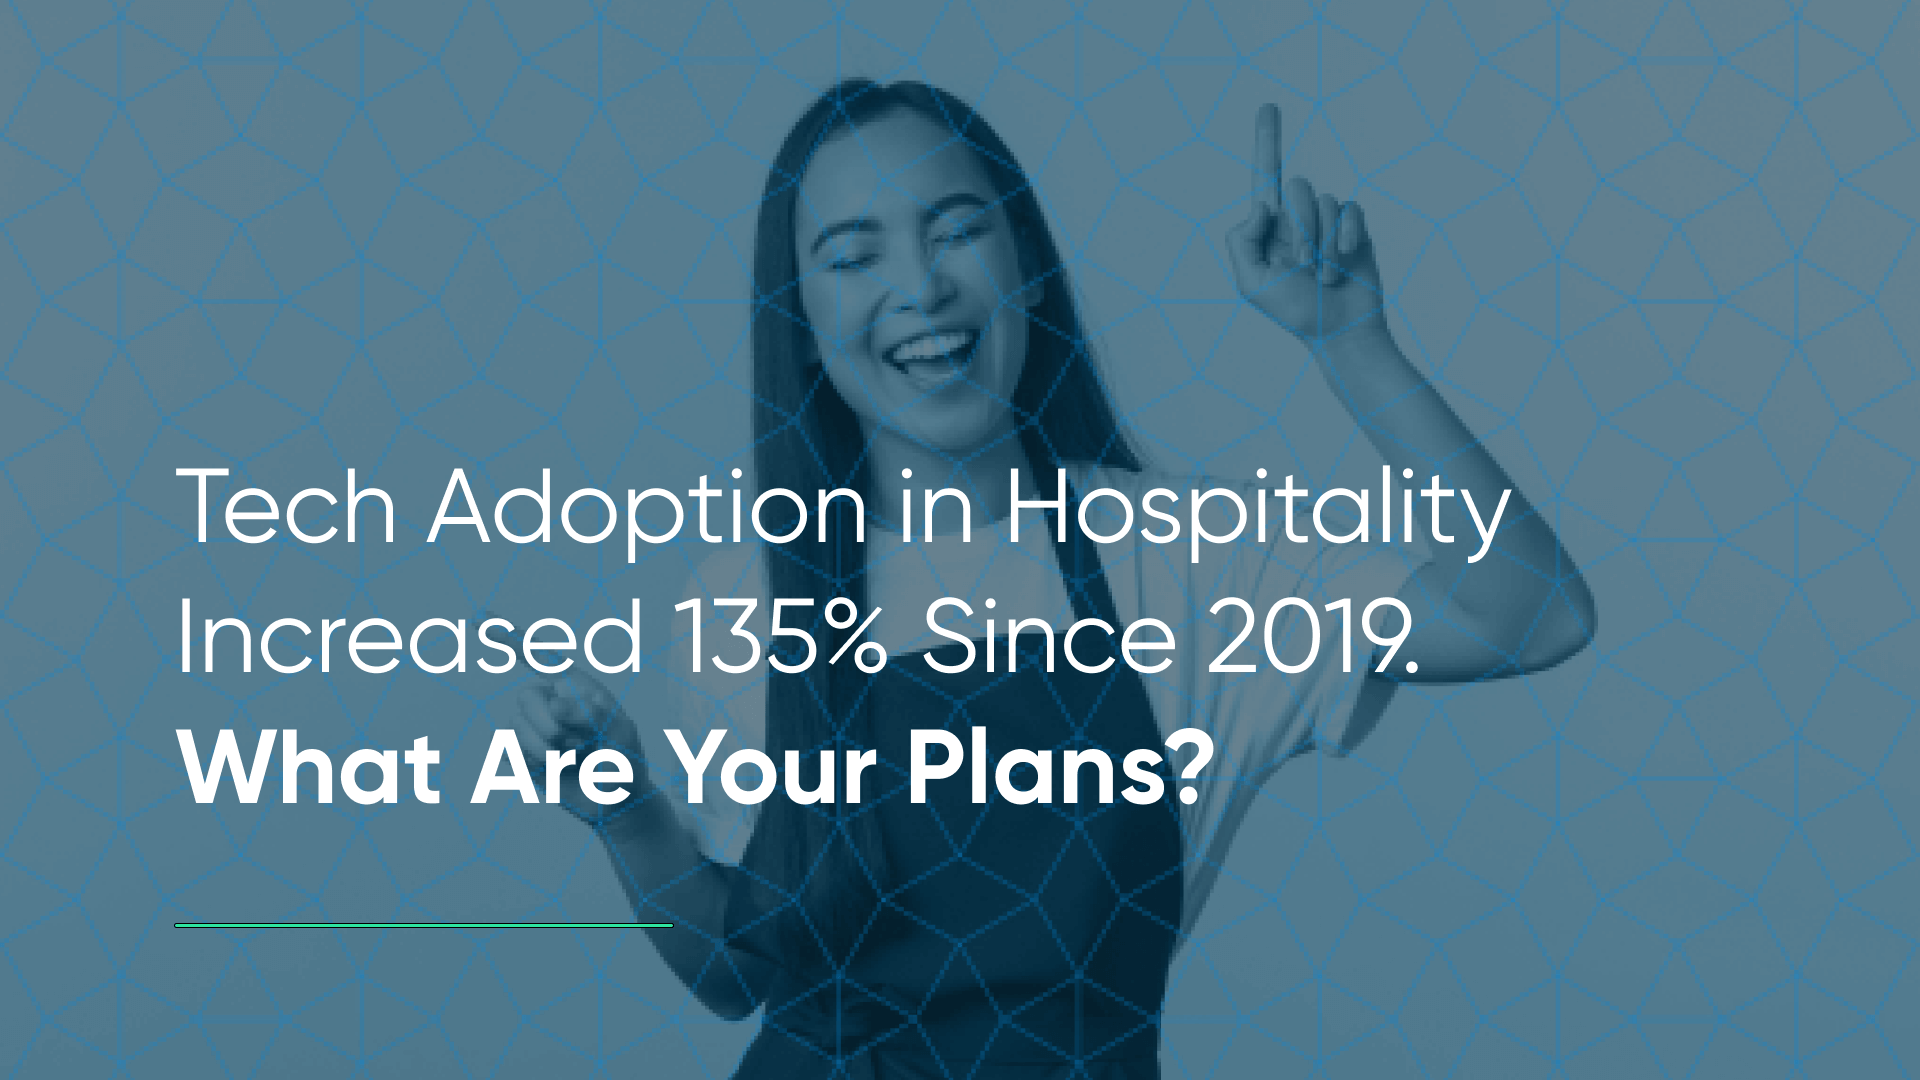 tech adoption in hospitality is up 135%